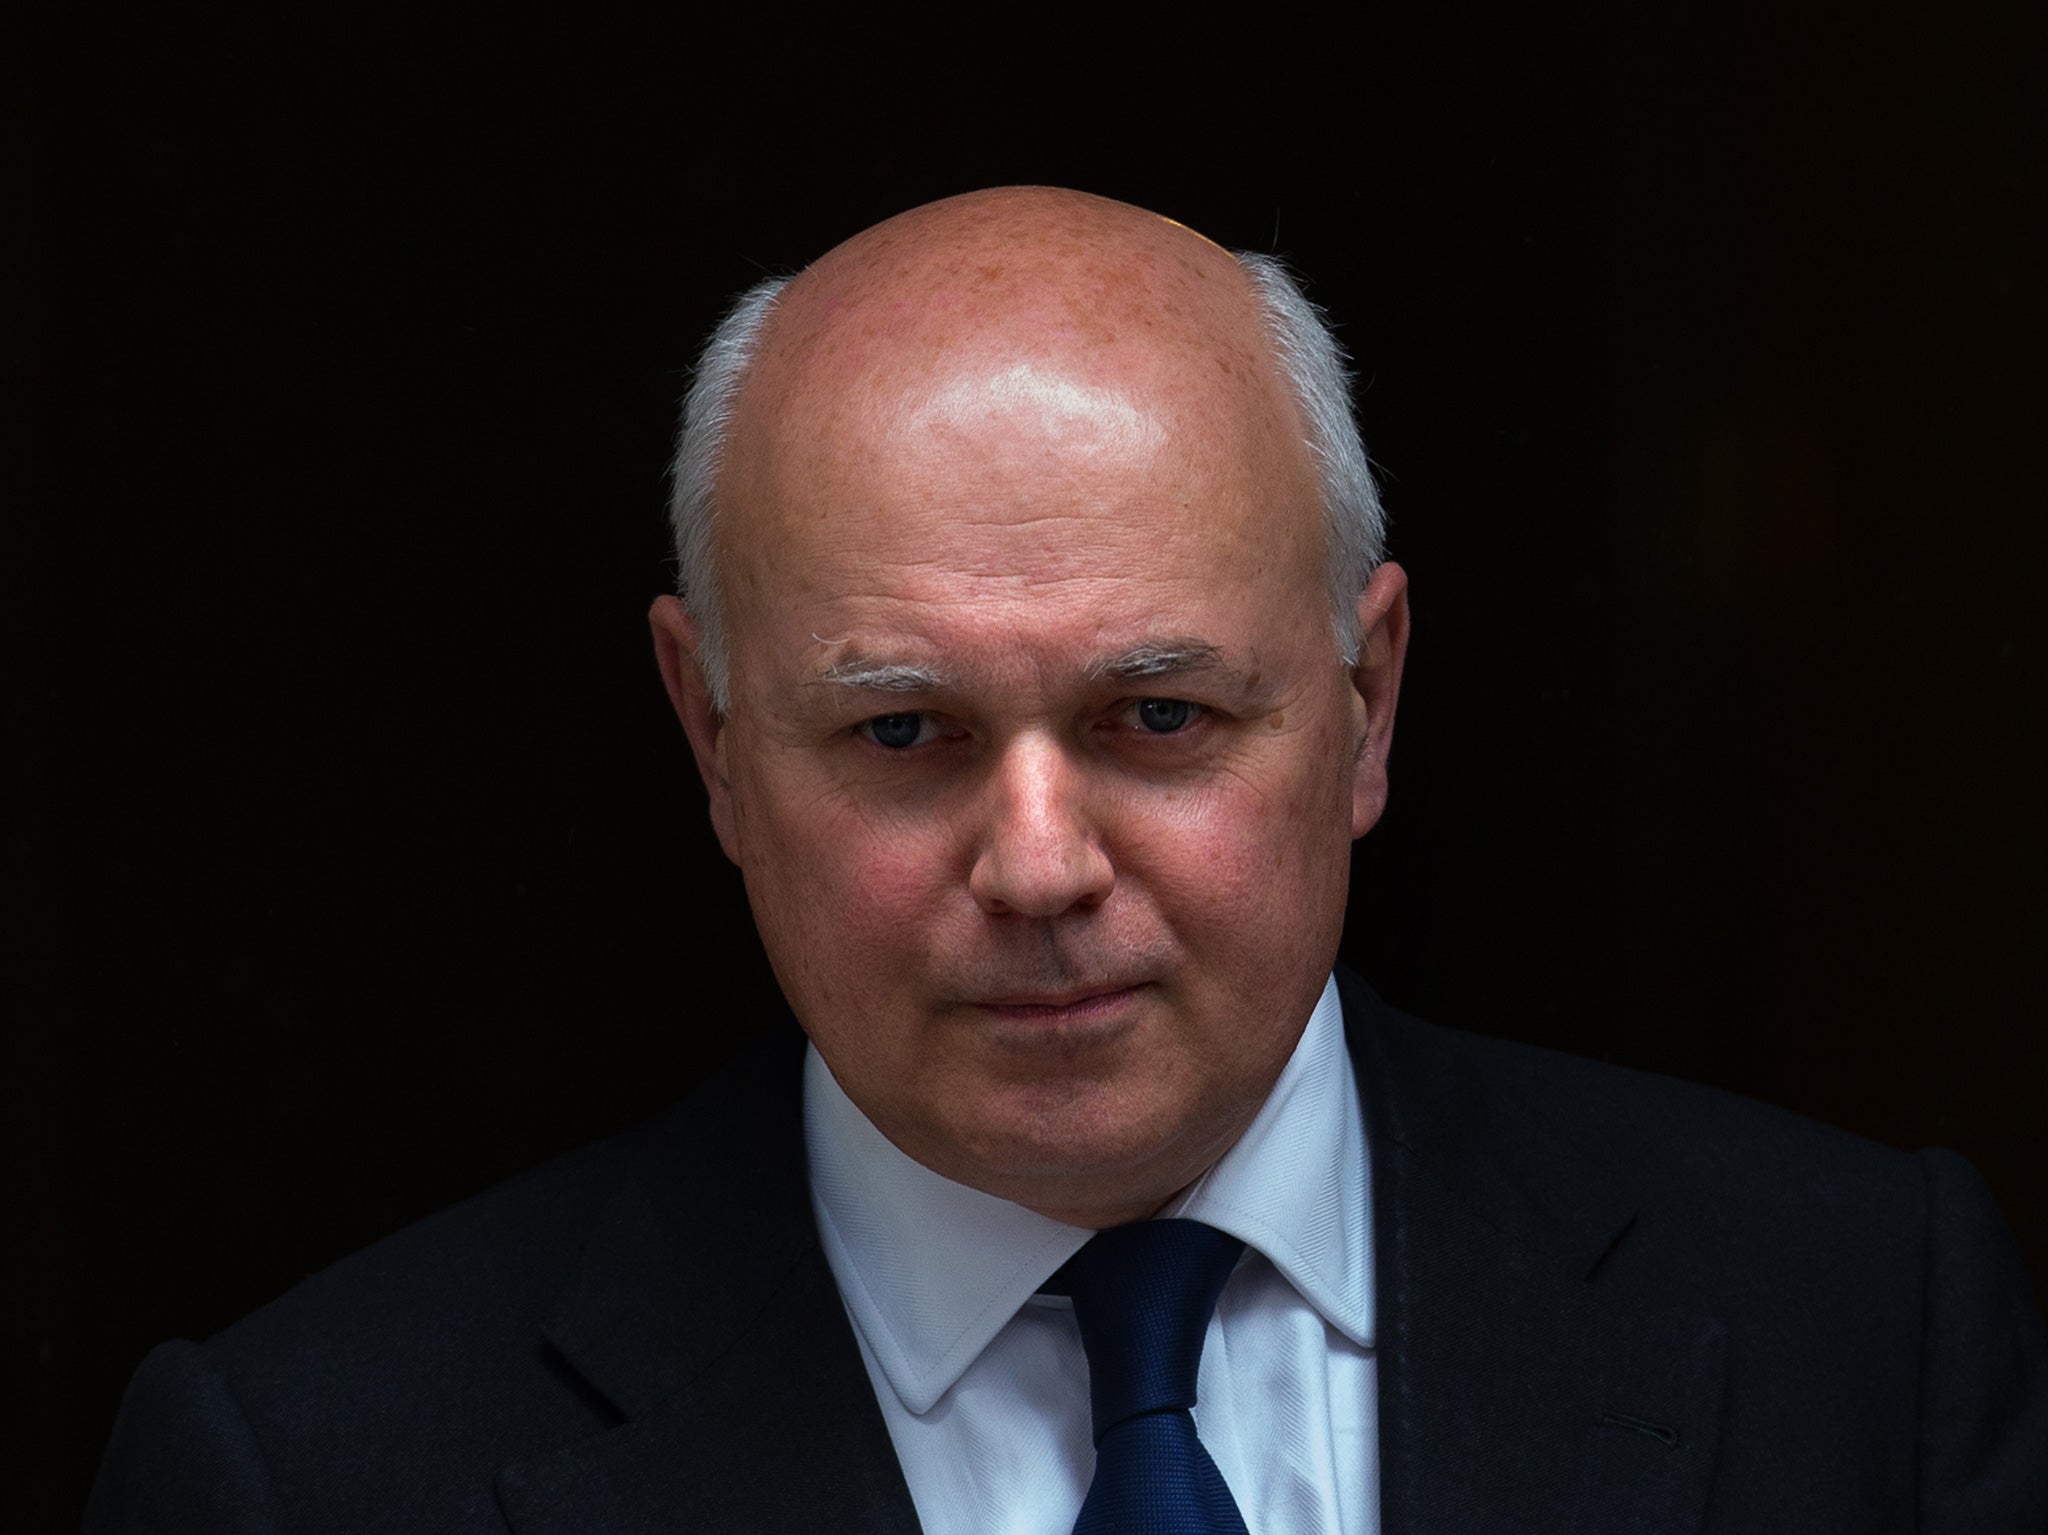 Iain Duncan Smith has suffered numerous IT setbacks with his Universal Credit programme